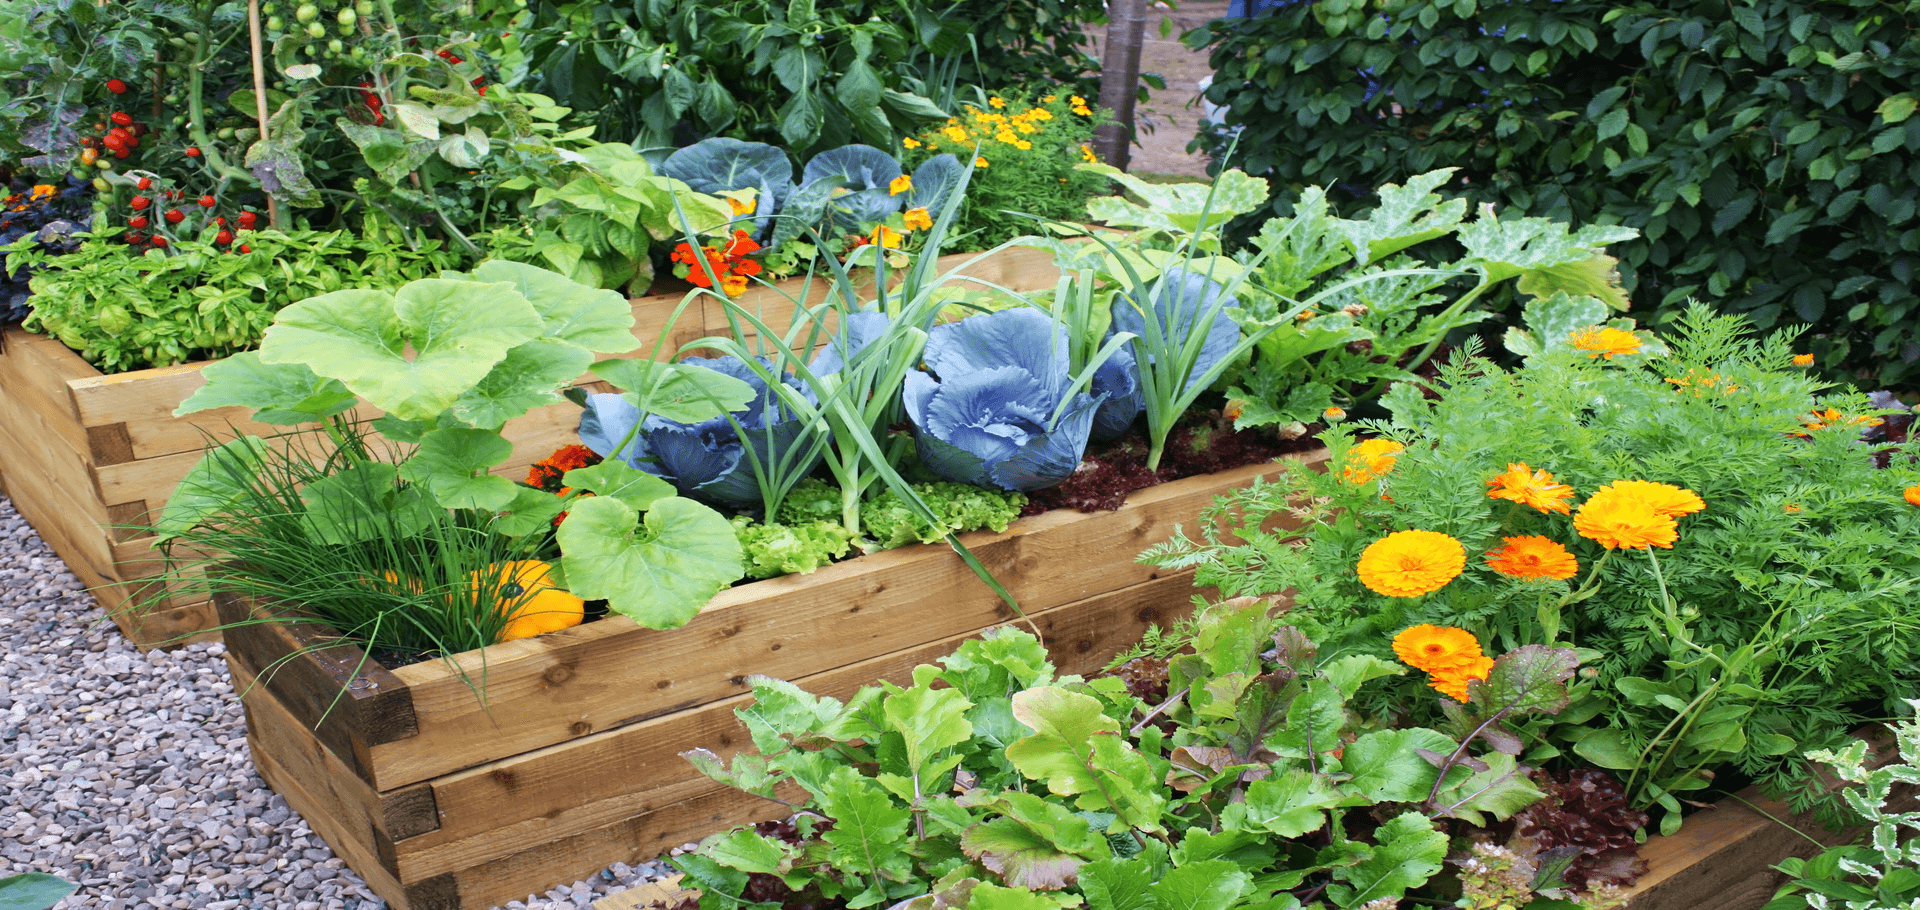 How to protect a vegetable garden from pests